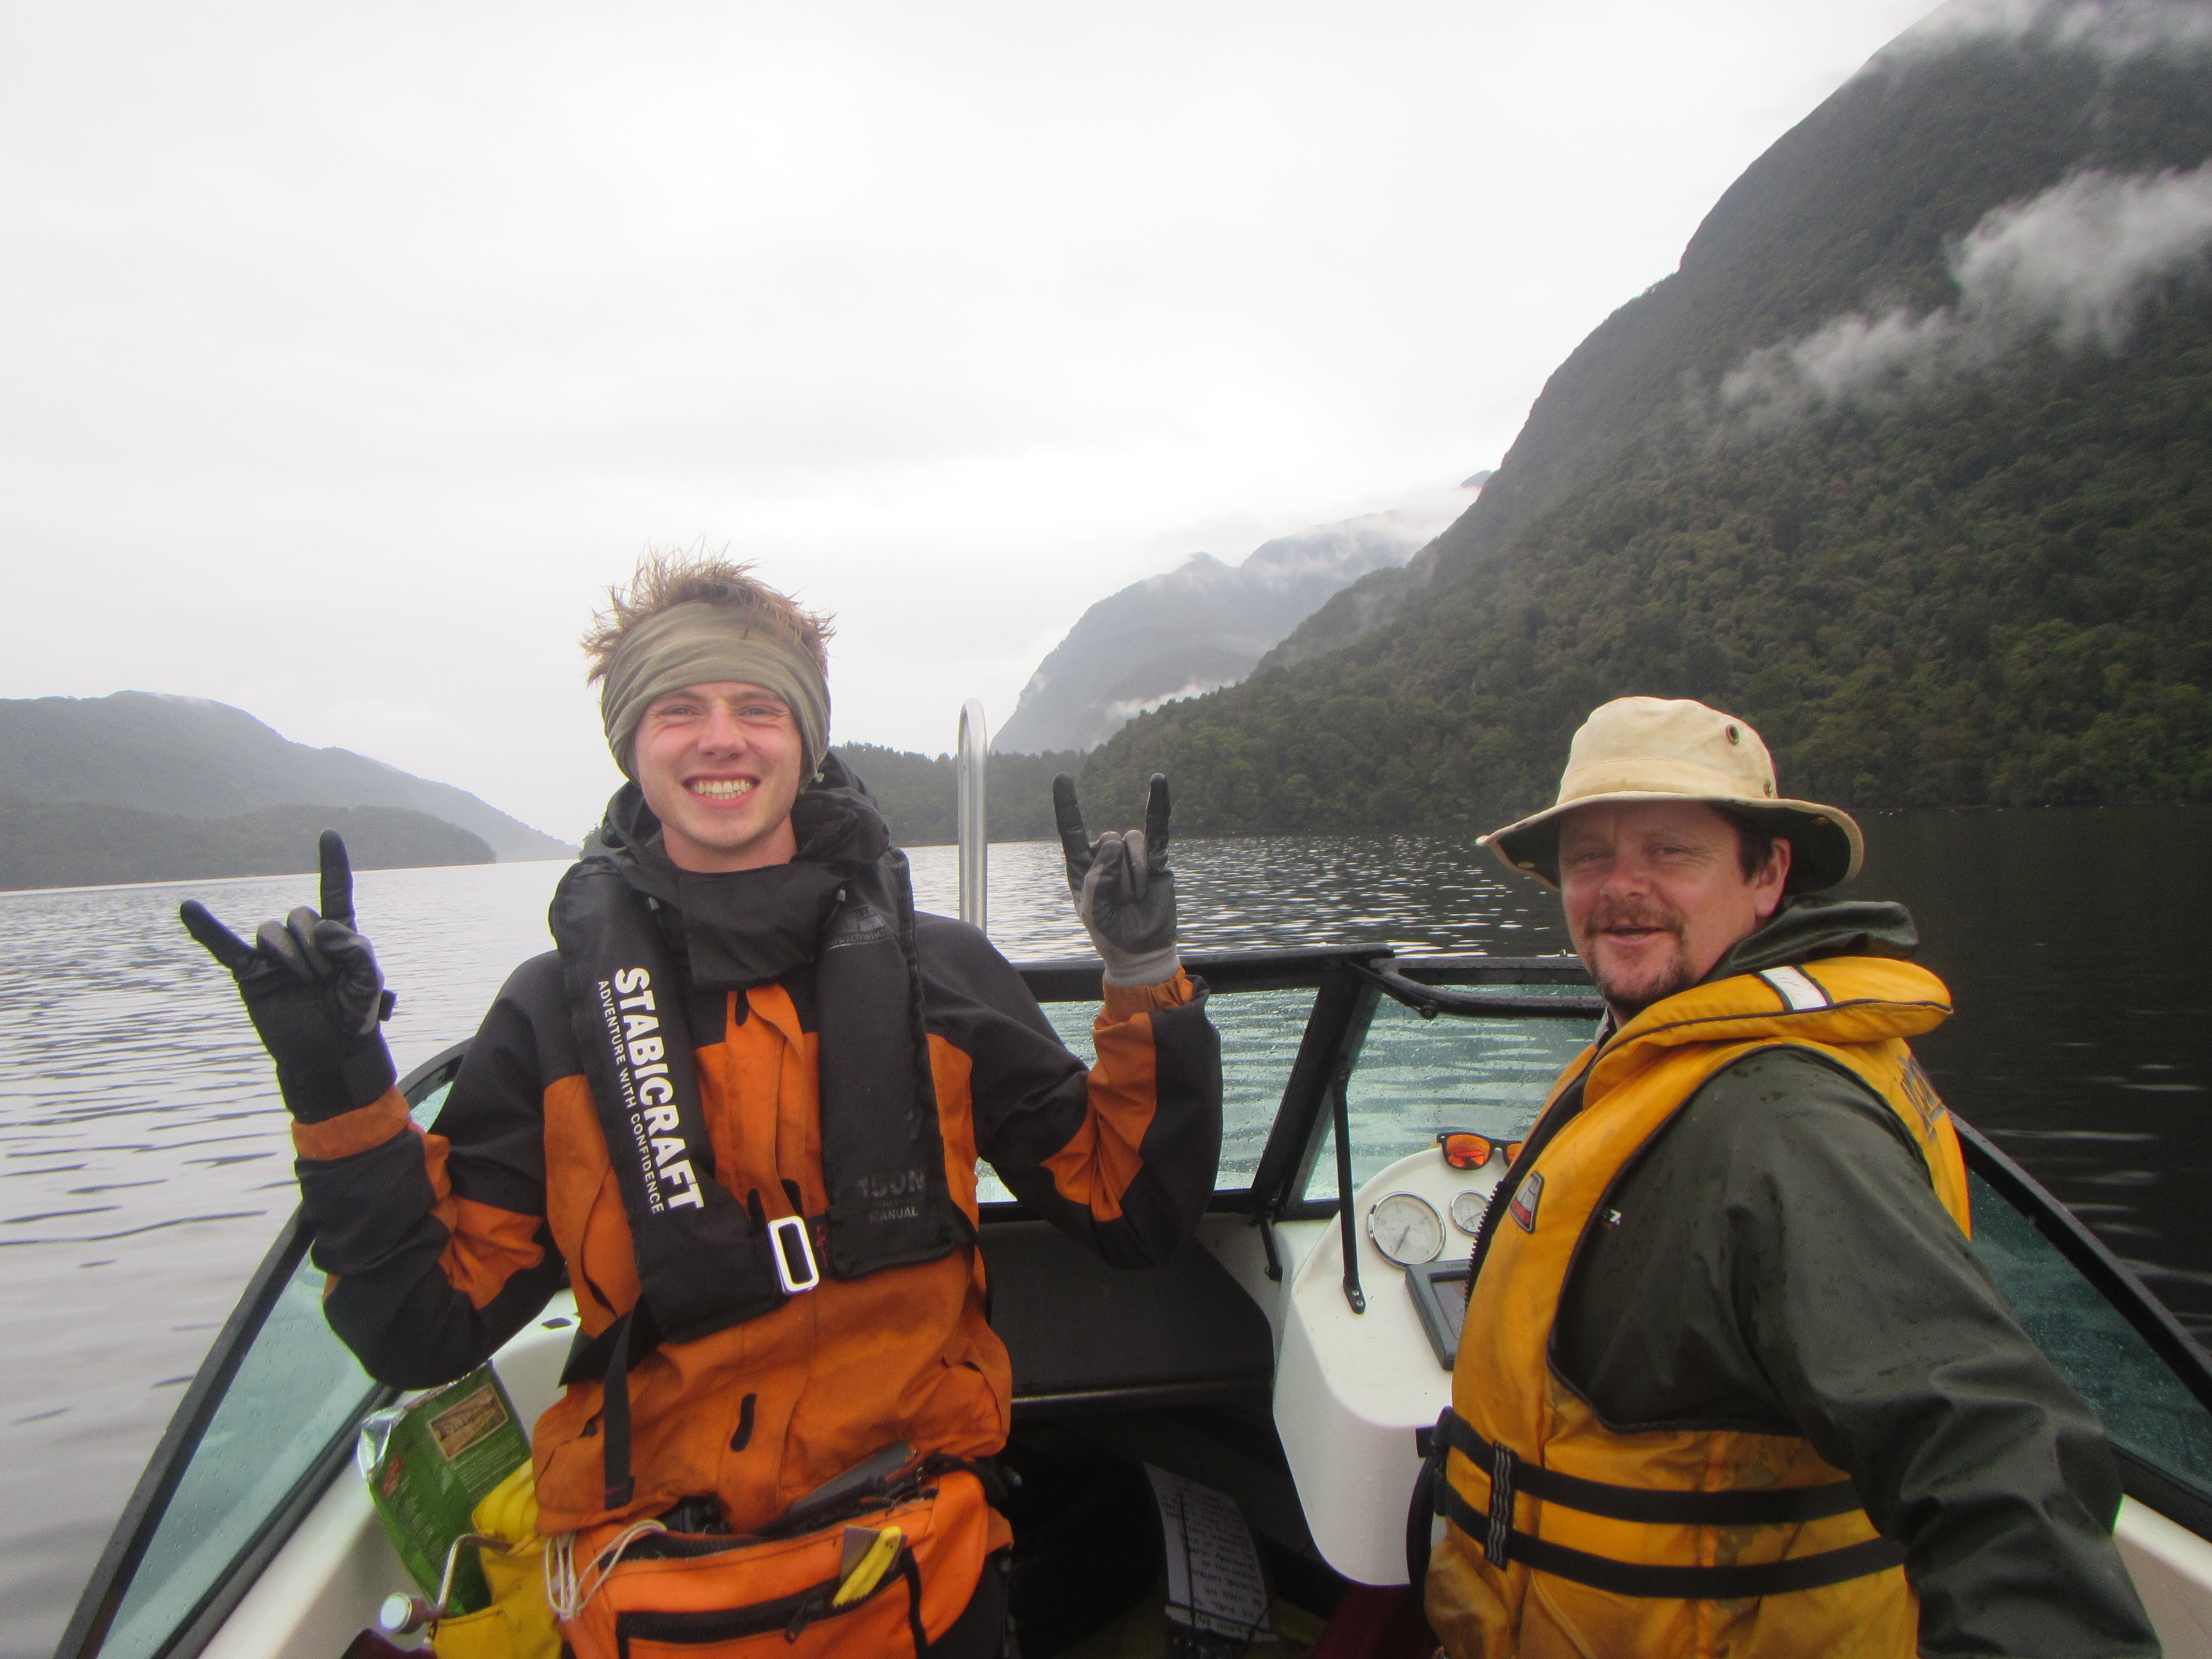 Two men in lifejackets smiling on a dinghy.